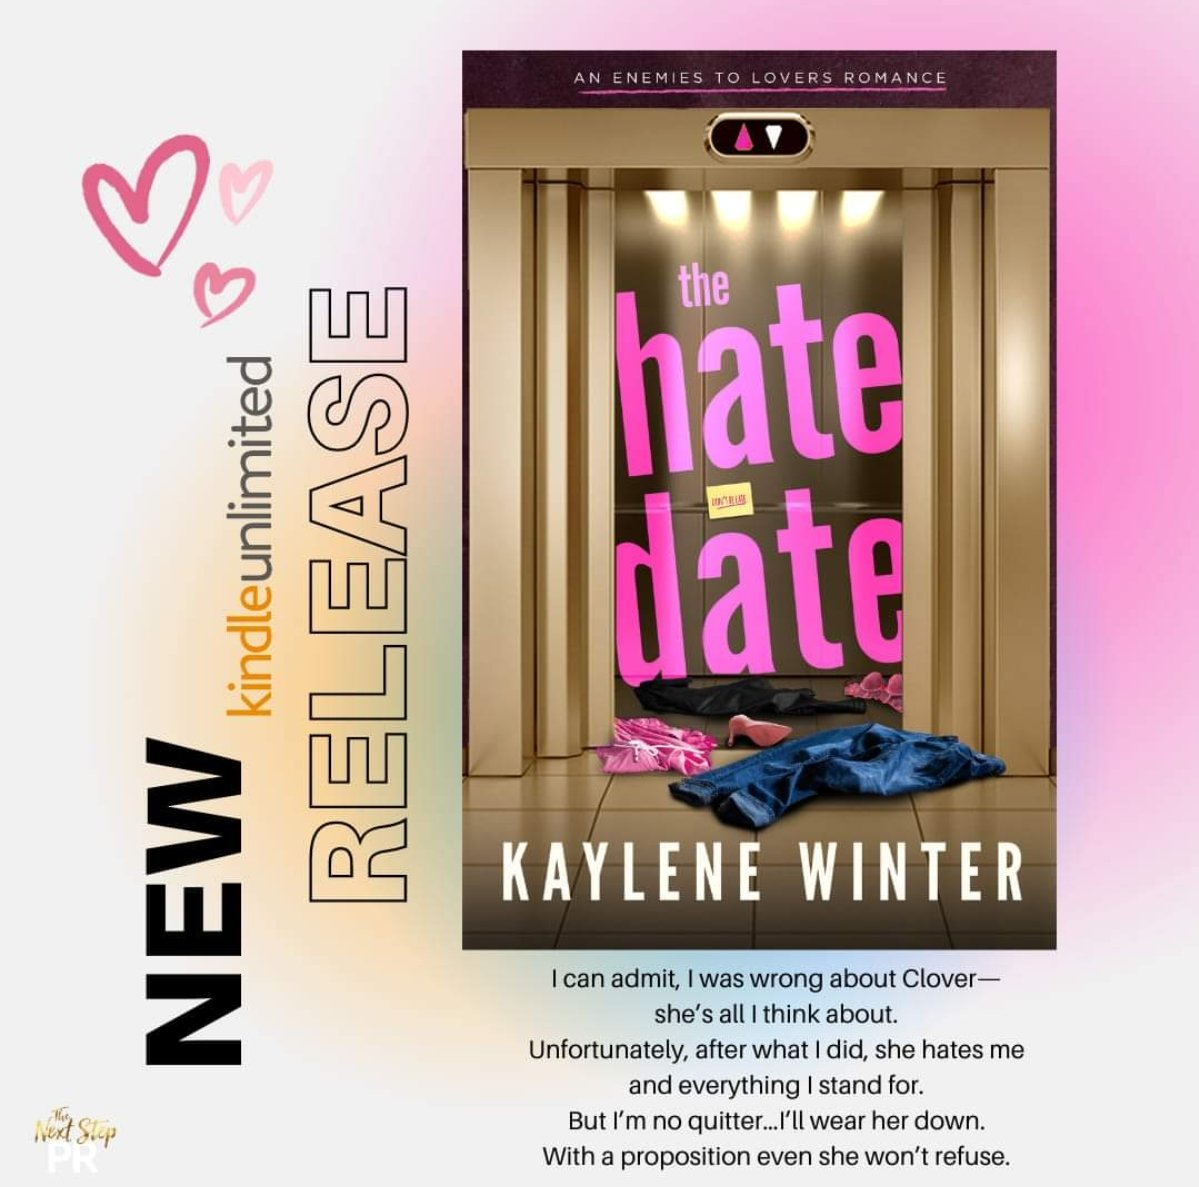 𝗧𝗛𝗘 𝗛𝗔𝗧𝗘 𝗗𝗔𝗧𝗘 - 𝗔𝗩𝗔𝗜𝗟𝗔𝗕𝗟𝗘 𝗡𝗢𝗪!

#TheHateDate @kayleneromance #OutNow
#TheHateDateReleaseKW #KayleneWinter
#ForcedProximity #Standalone
#ReadMe
 getbook.at/HateDate

#Hosted @TheNextStepPR